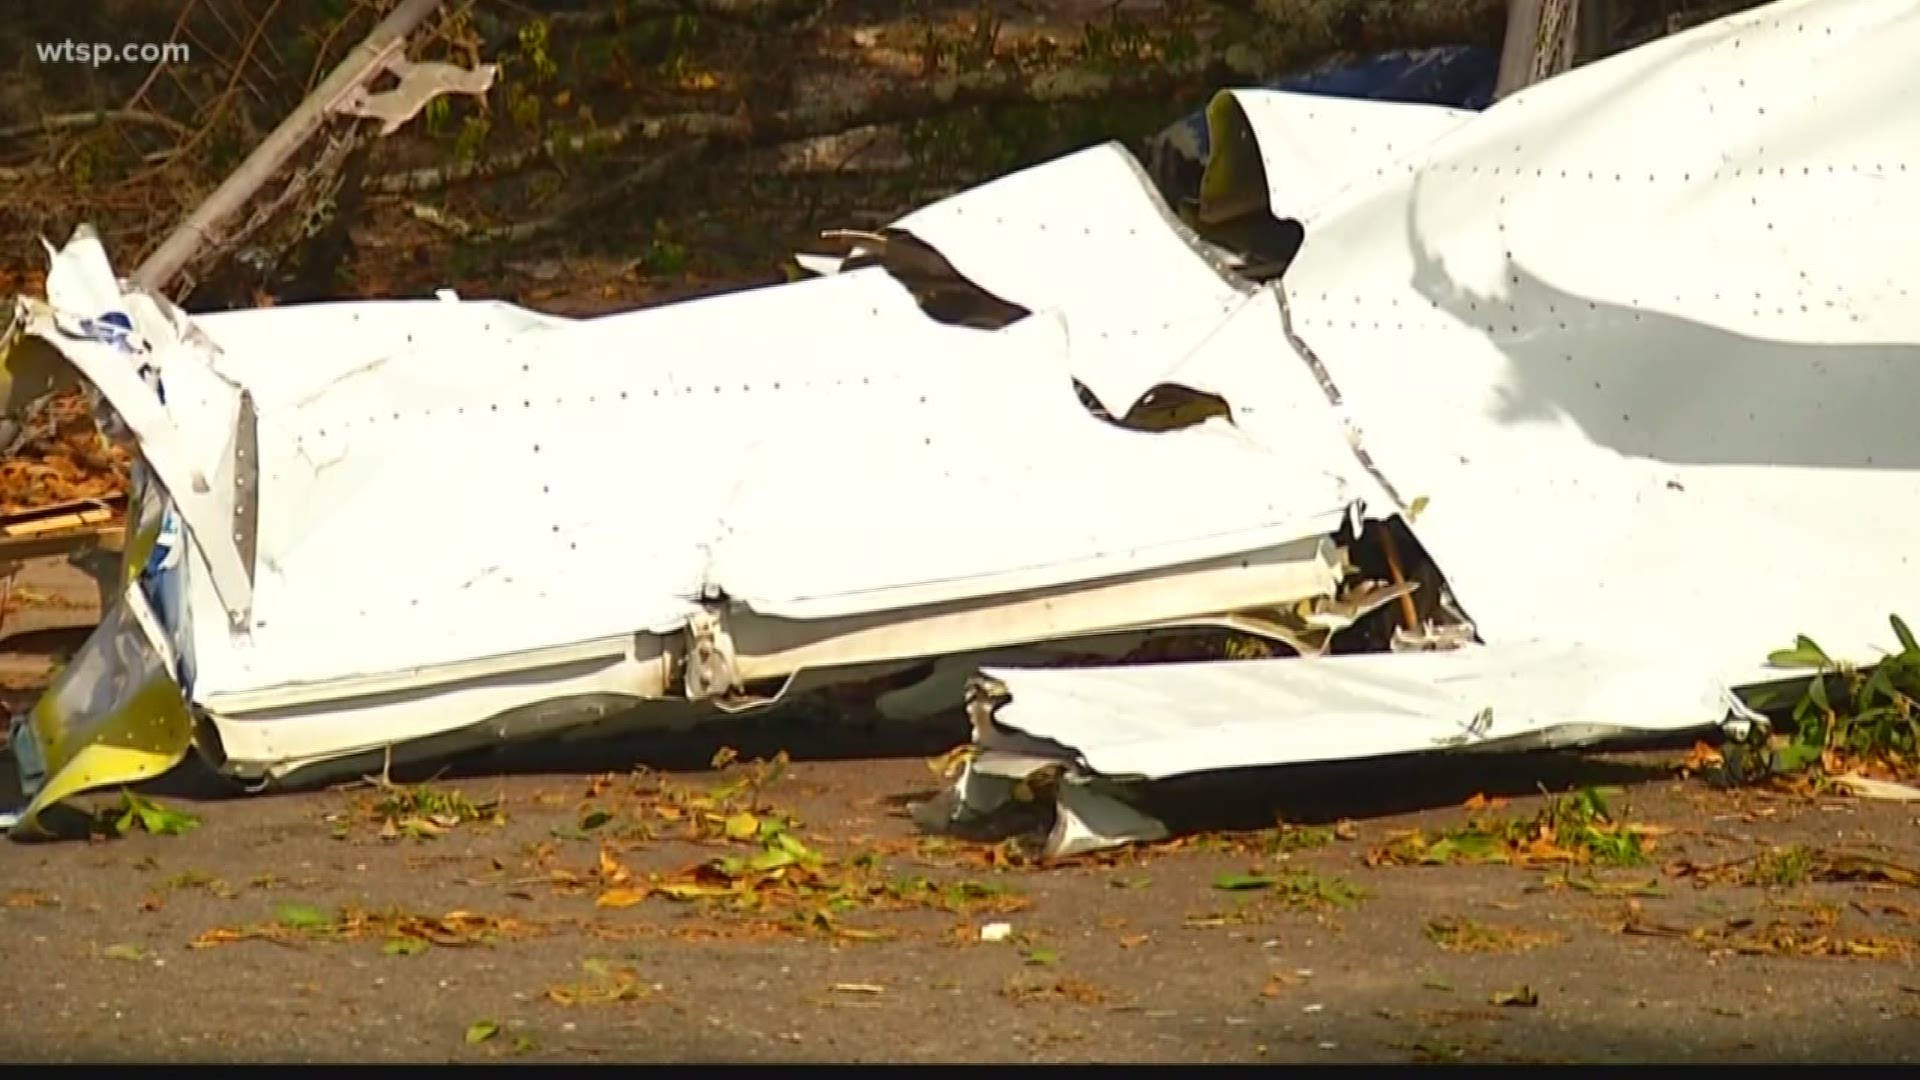 Two people are dead after the small plane they were in crashed down into a neighborhood Thursday in Polk County.